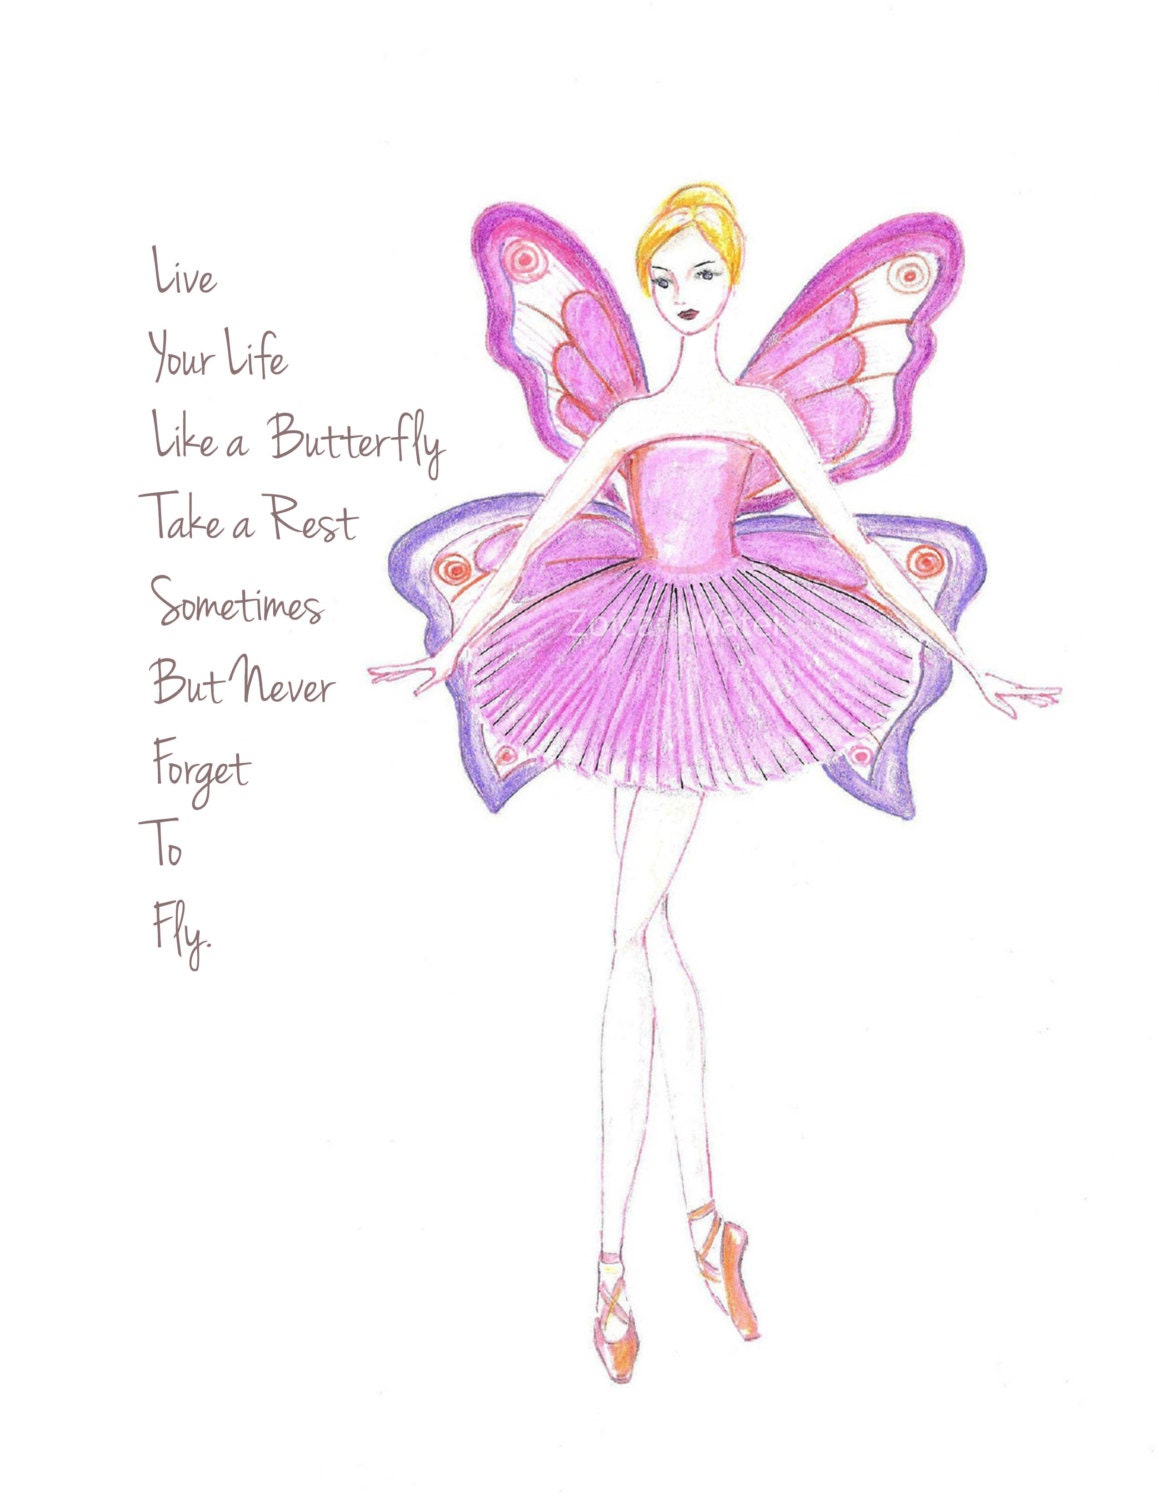 Pink ballerina Illustration Print- Girls Room Decor-Inspirational Print-Live Your LIfe Like a Buttefly- Pink Bedroom - Zoia